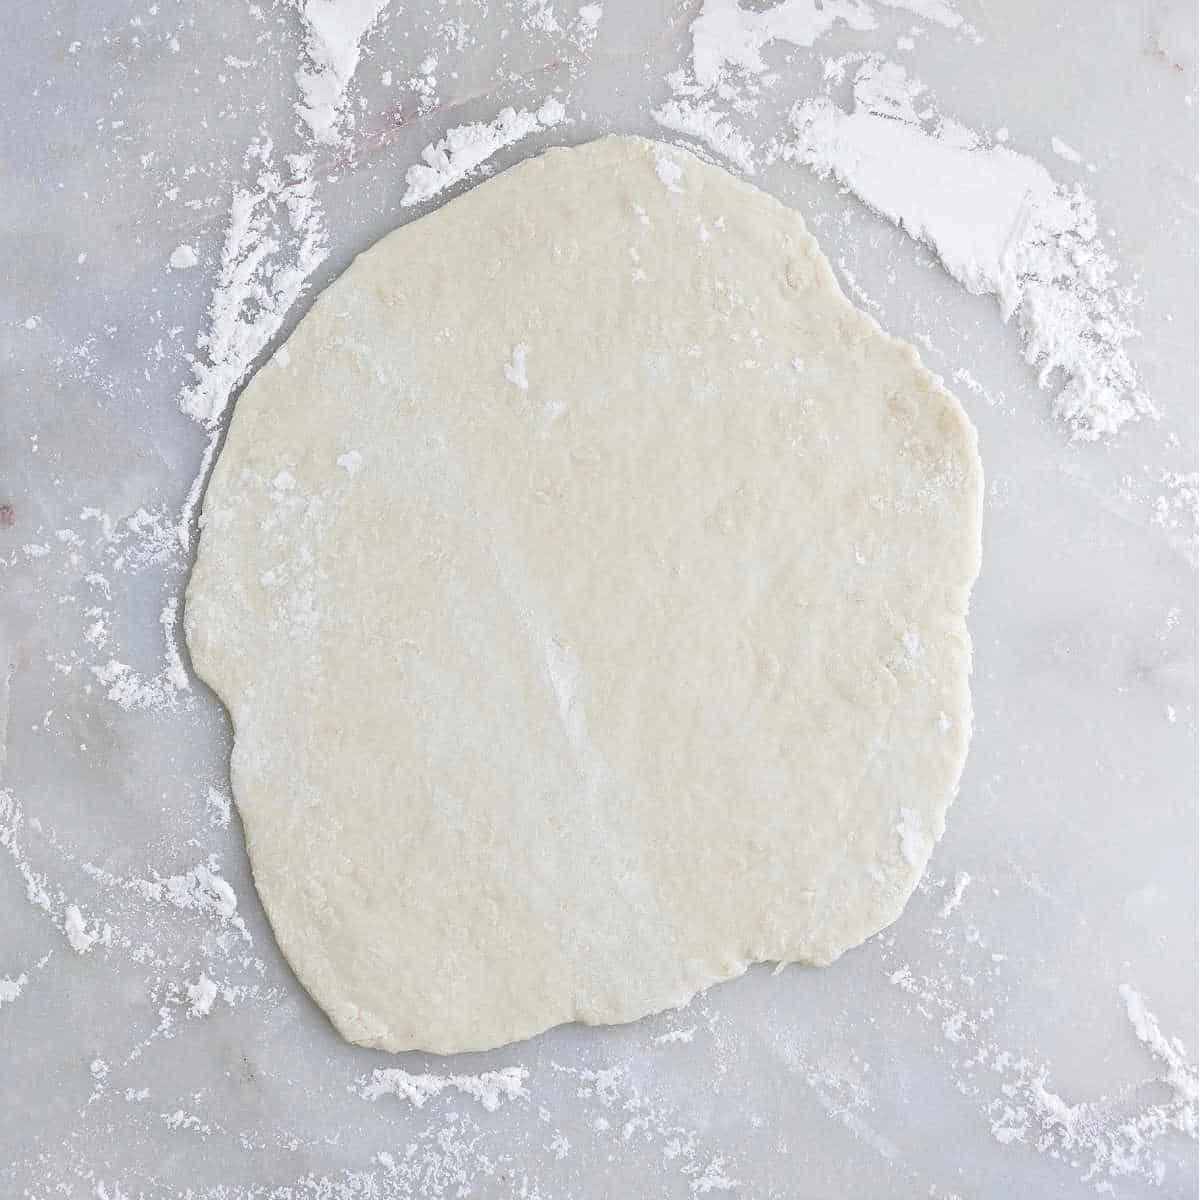 dough rolled out into a circle on a floured surface